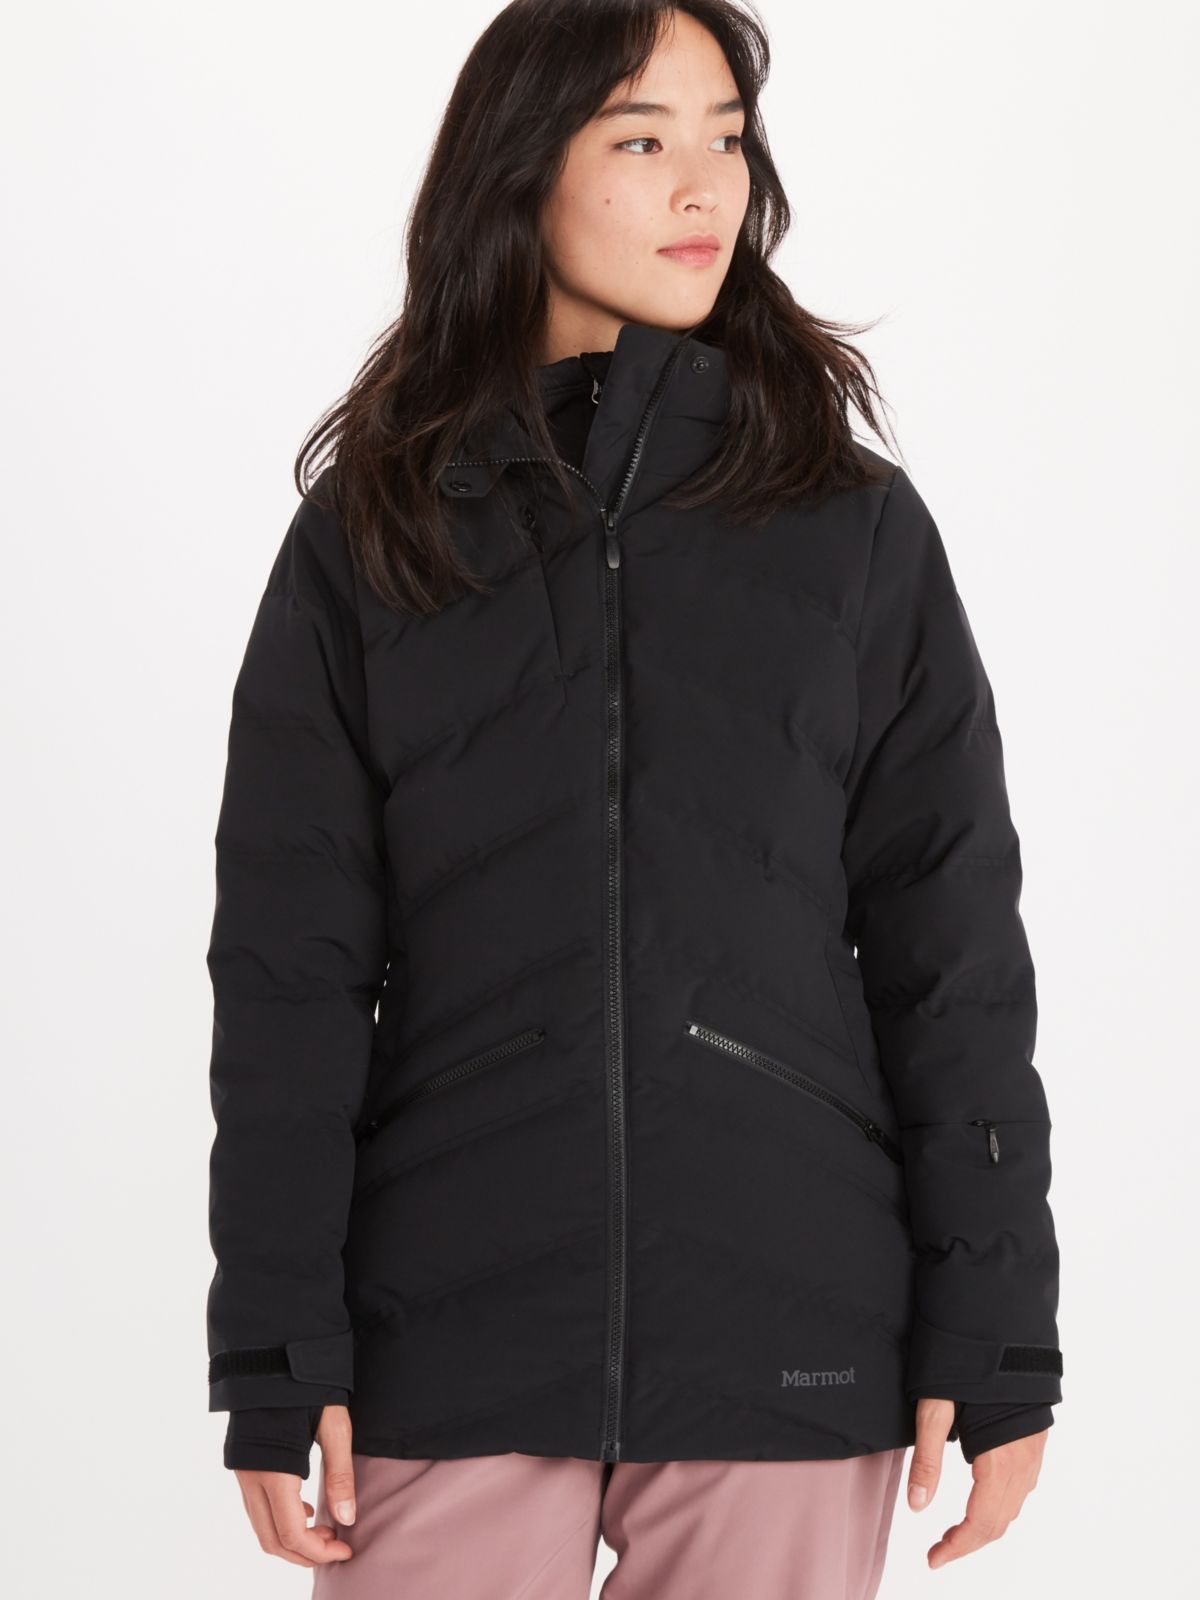 puffy jacket front view